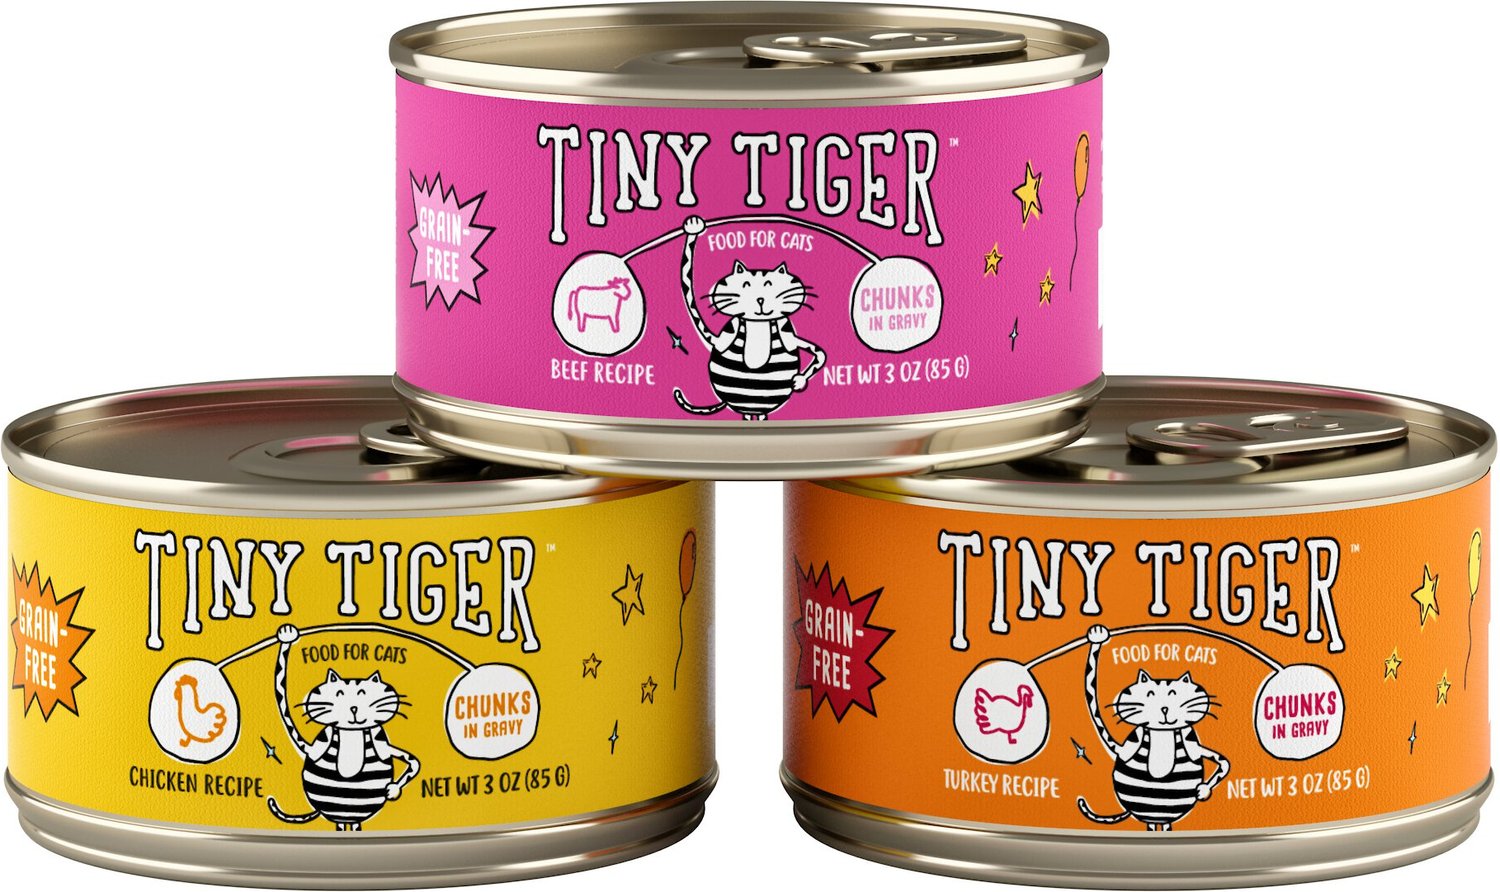 Tiny Tiger Chunks in Gravy Beef & Poultry Recipes Variety Pack